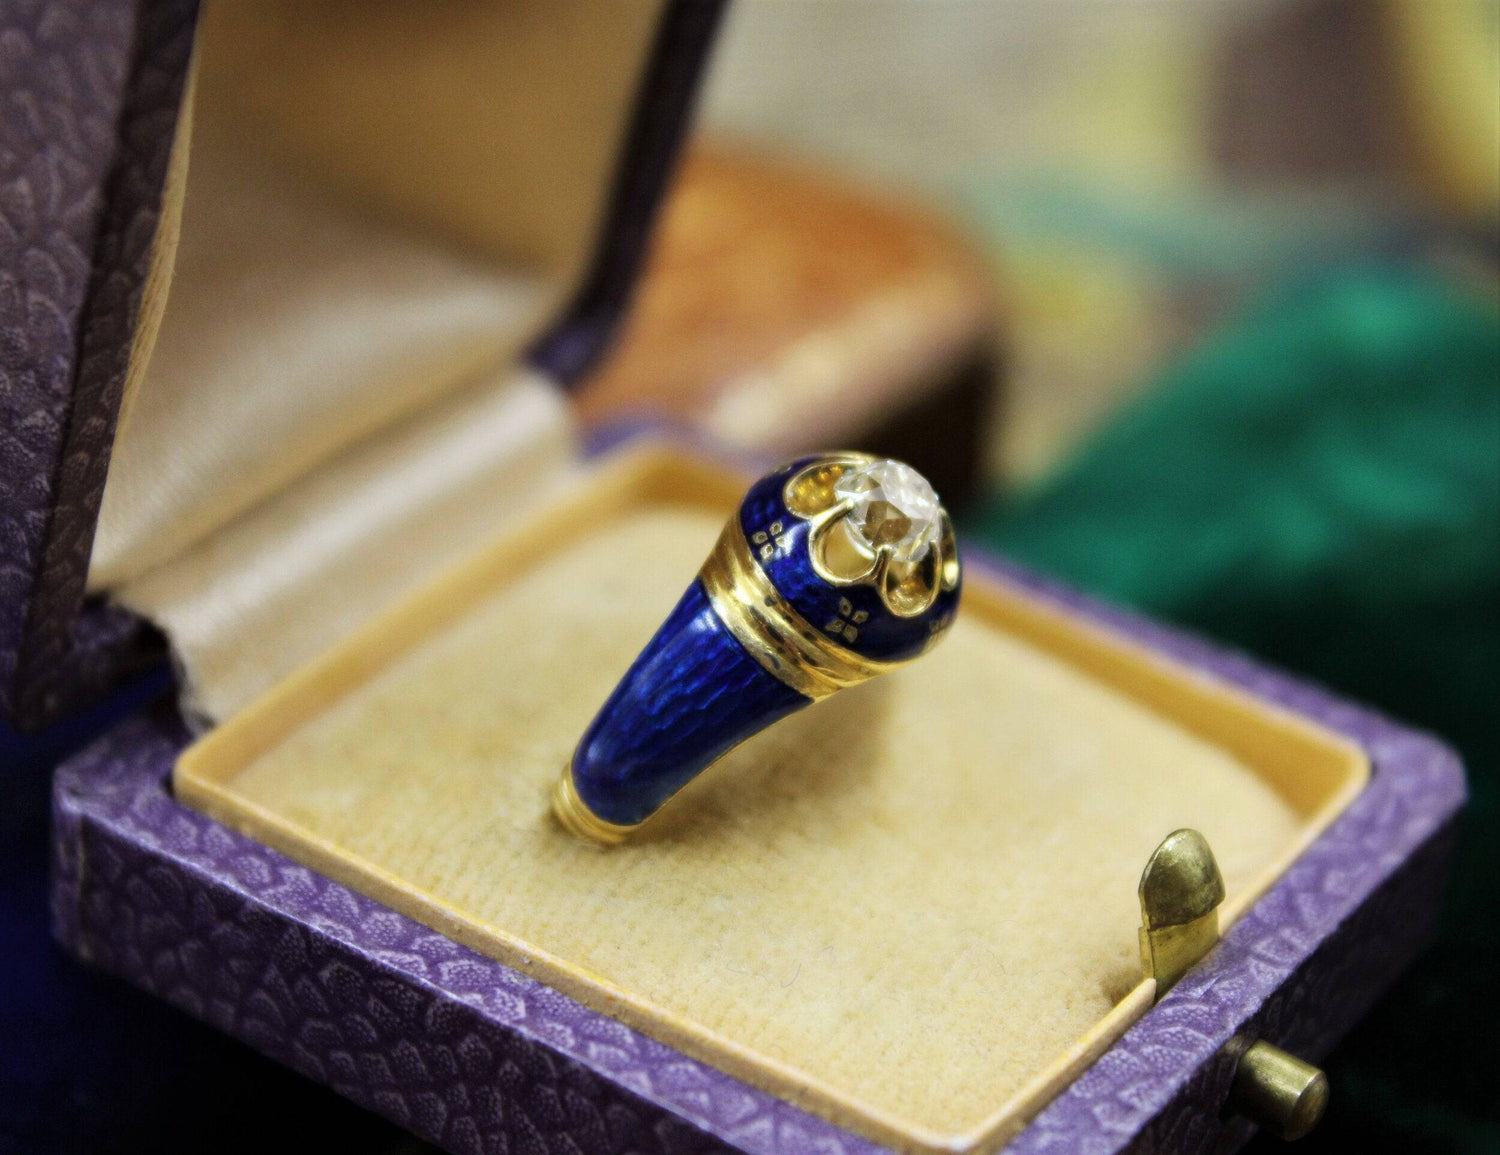 A very fine Diamond and Blue Enamel Mourning Ring set in 18ct Yellow Gold, English, Circa 1850 - Robin Haydock Antiques